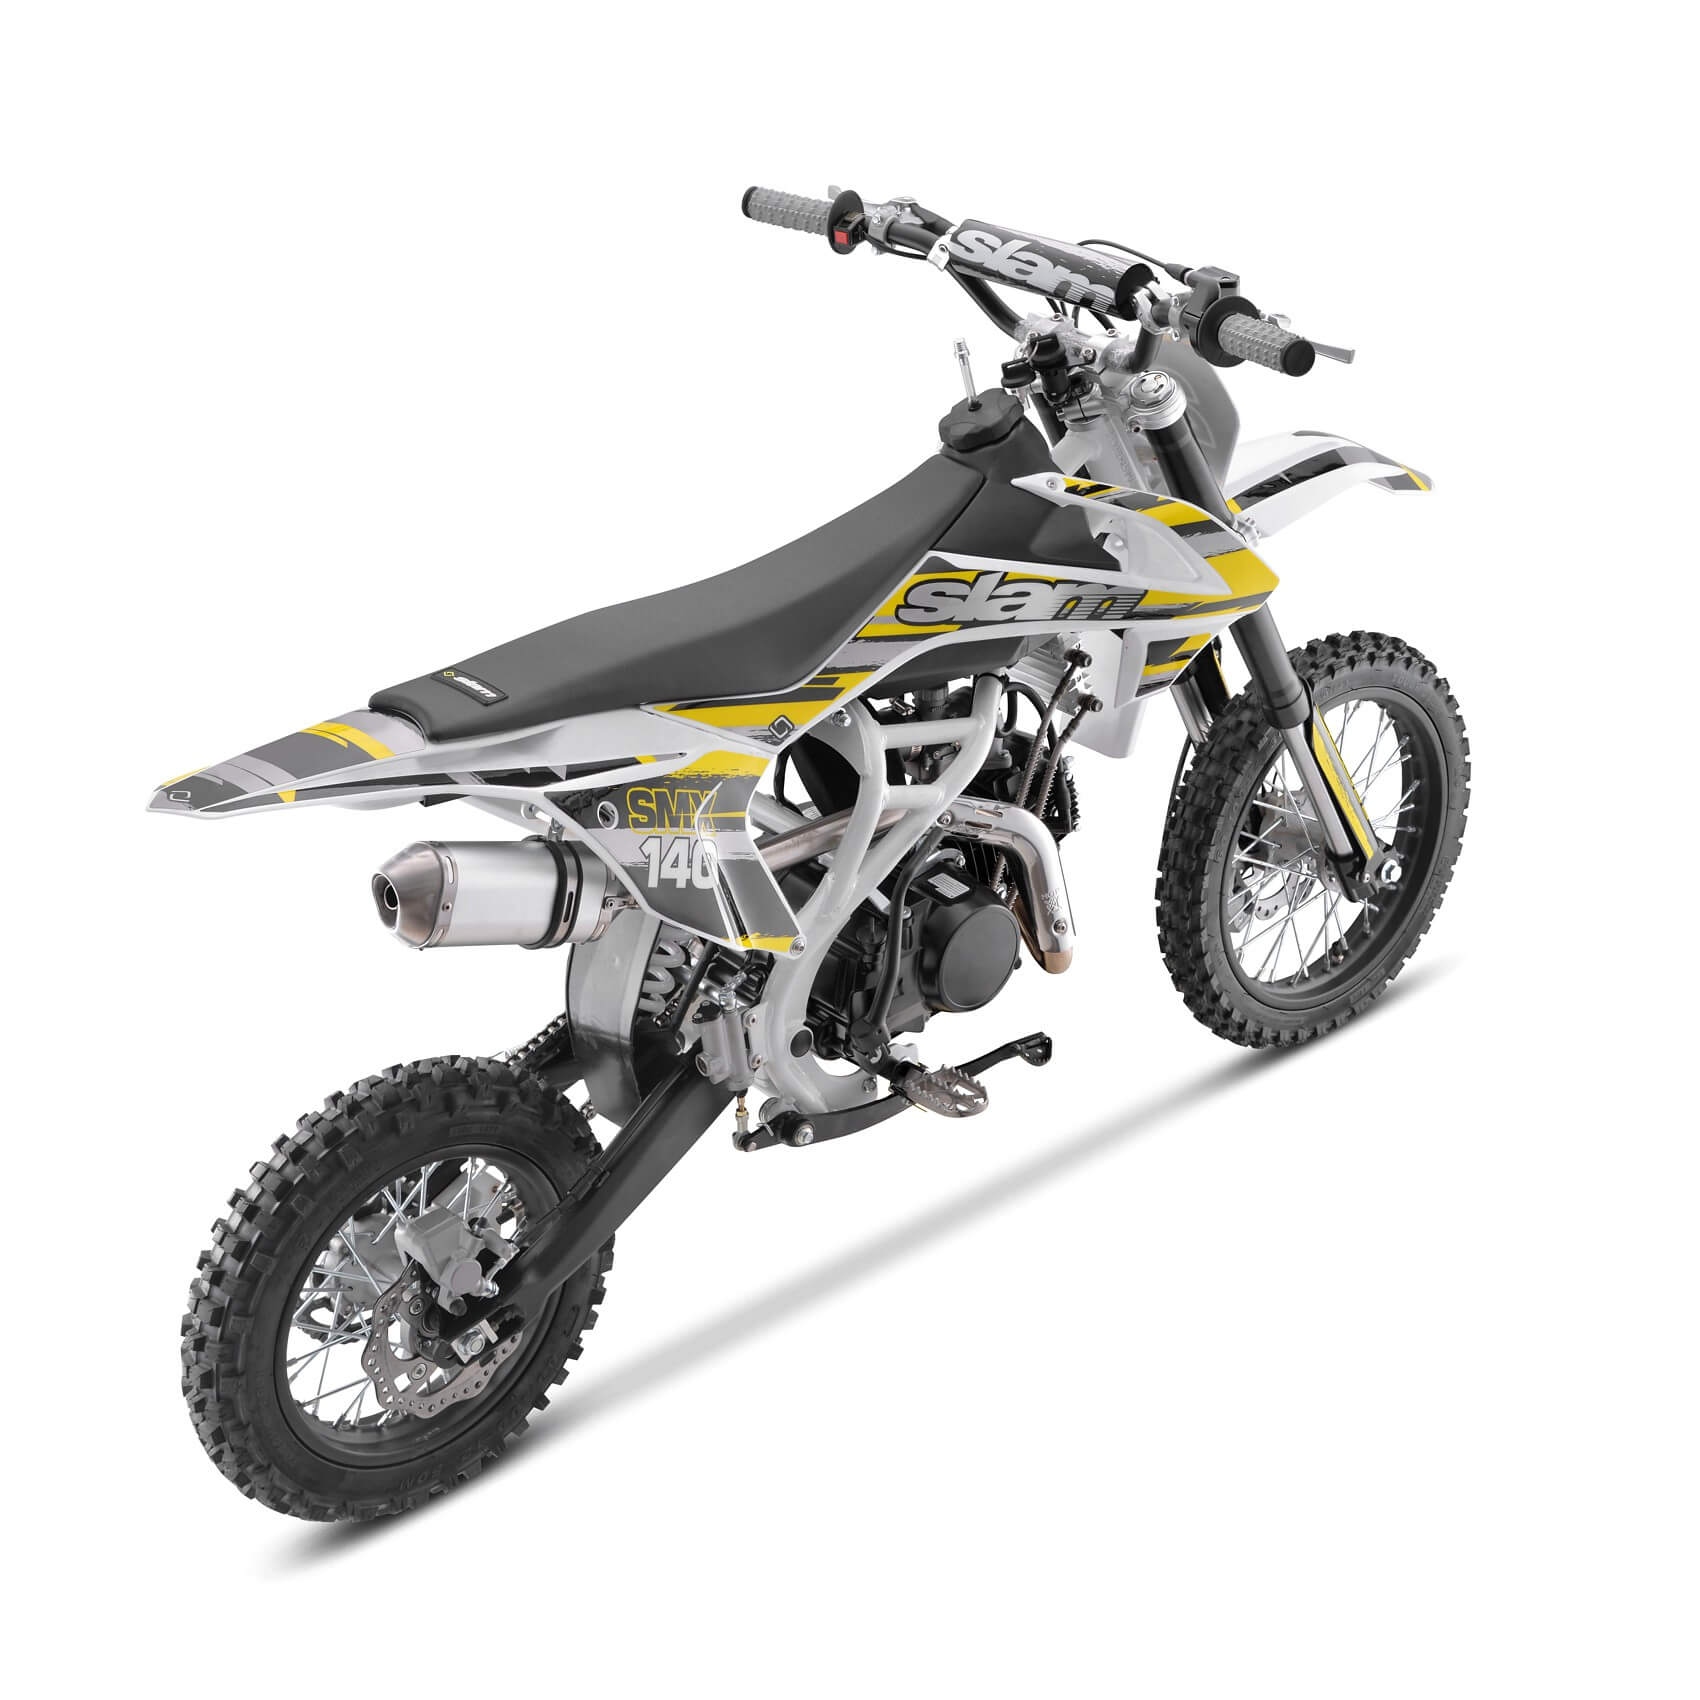 Load image into Gallery viewer, Slam SMX 140 Small Wheel Pit Bike
